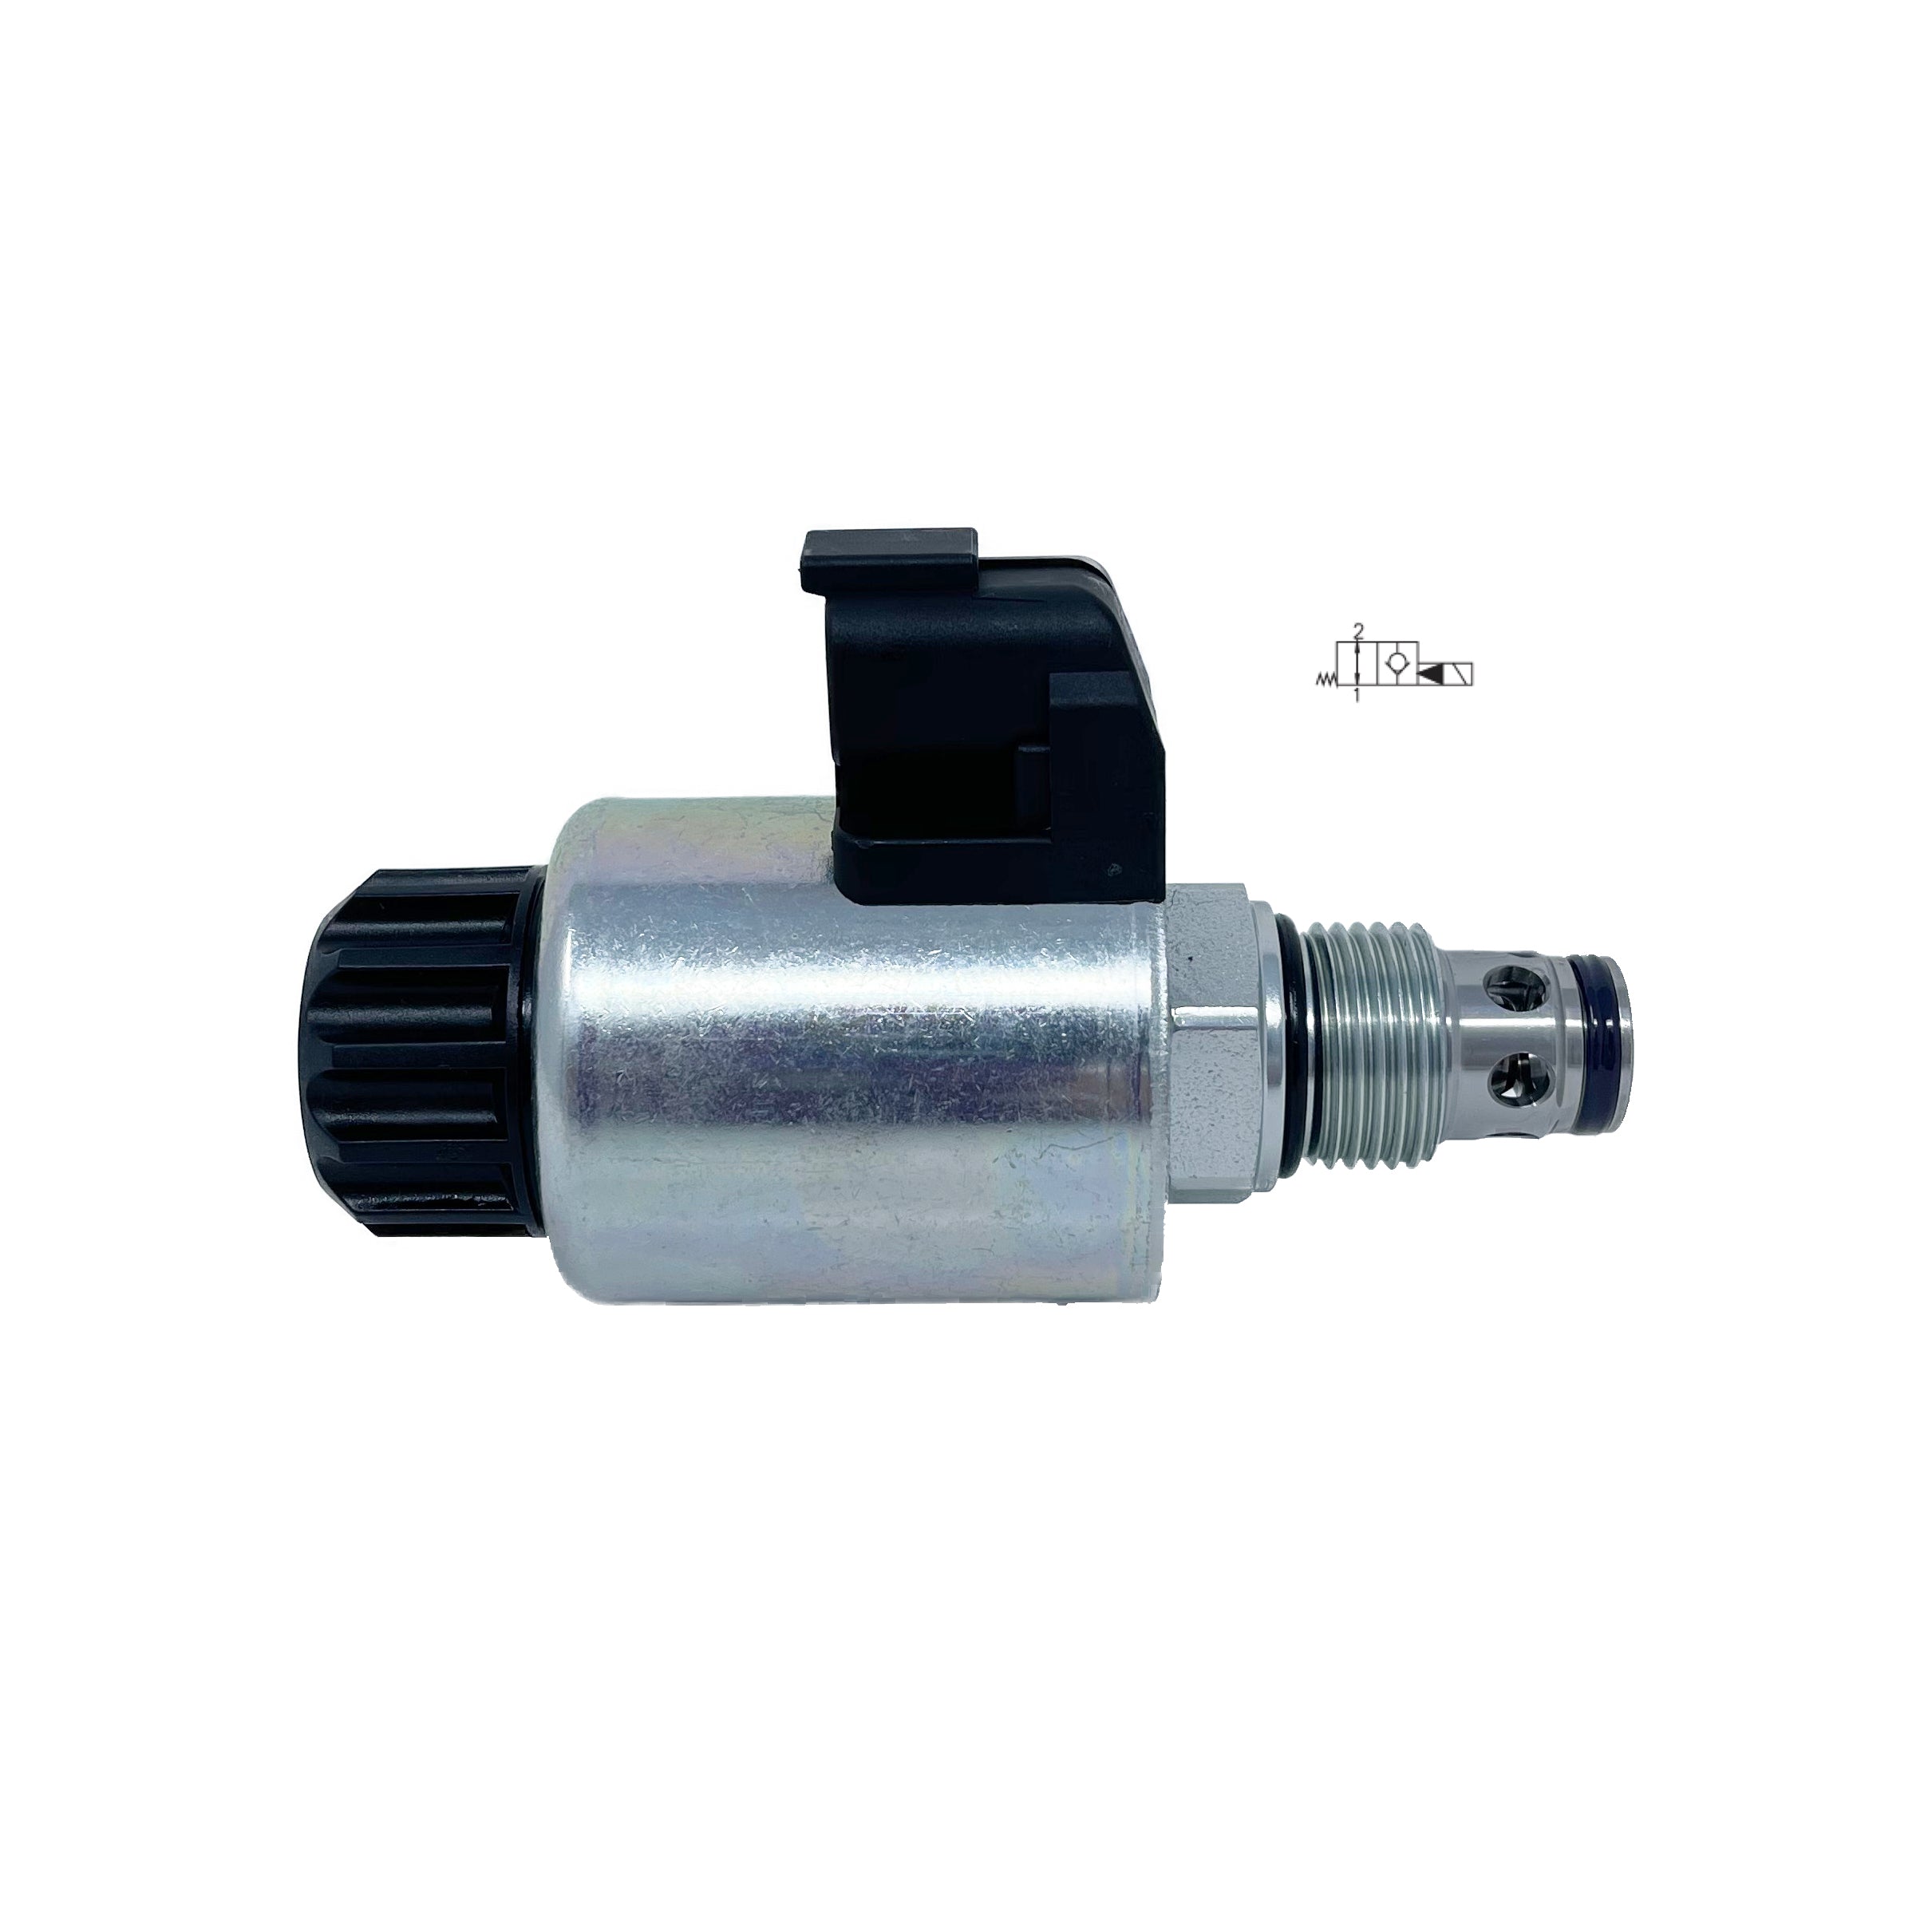 SD3E-B2/H2O2A12DT : Argo DCV, 16GPM, 5100psi, 2P2W, C-10-2, 12 VDC Deutsch, Flow 1 to 2 Neutral